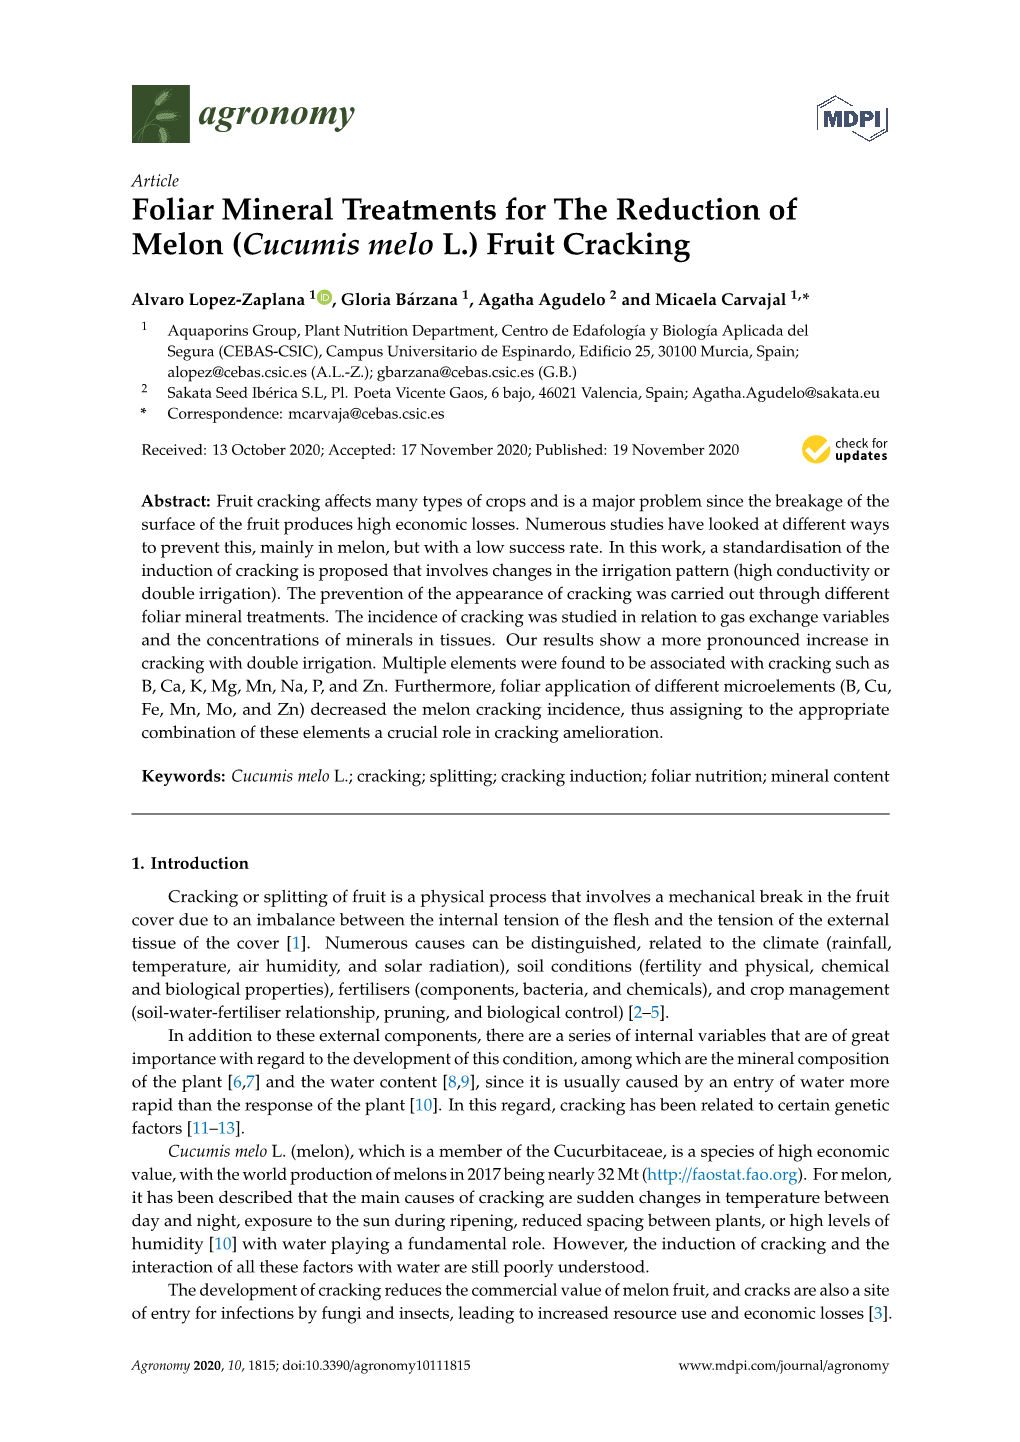 Foliar Mineral Treatments for the Reduction of Melon (Cucumis Melo L.) Fruit Cracking